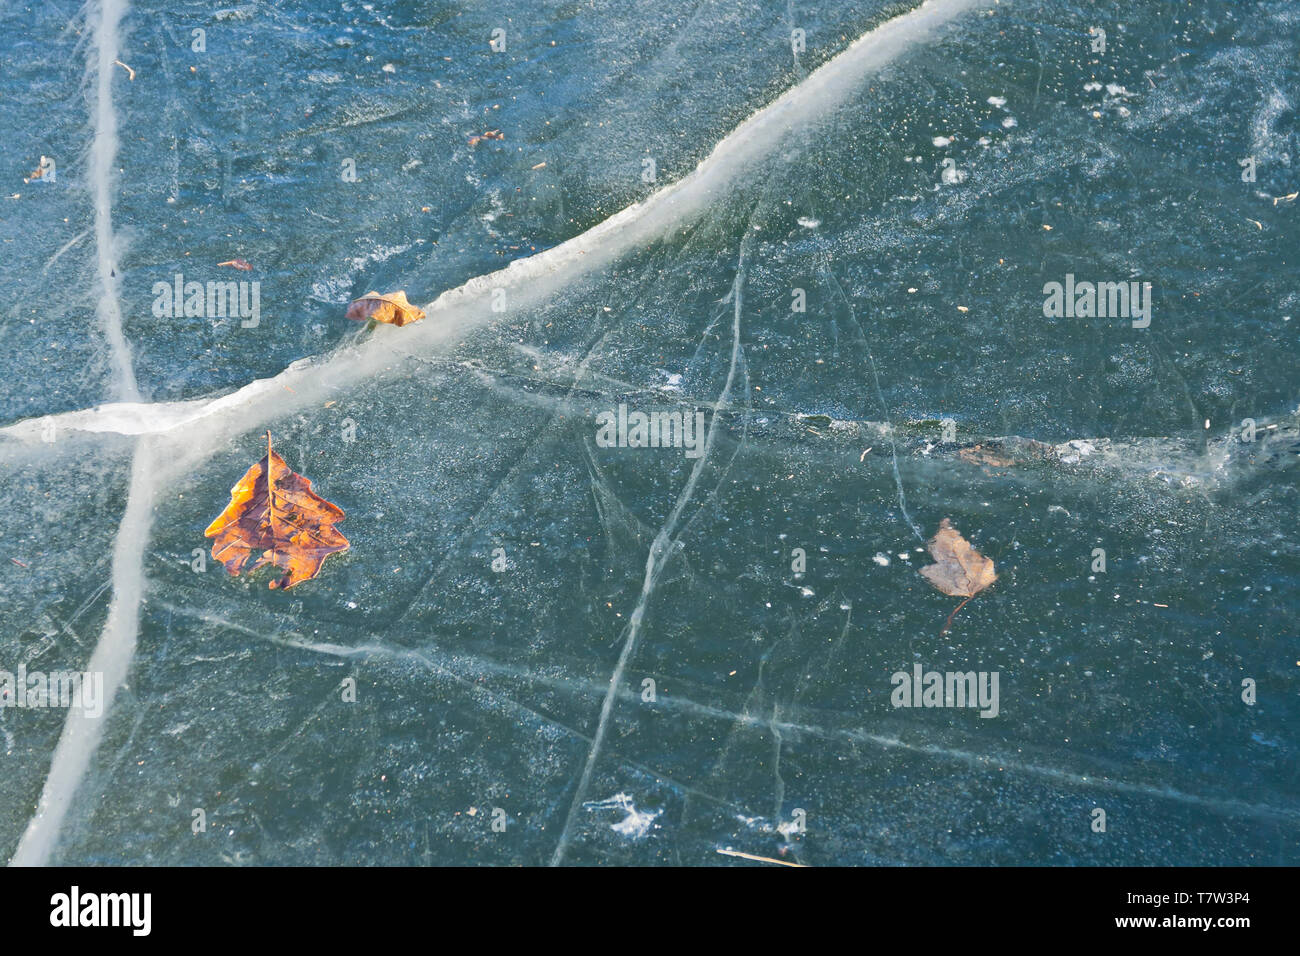 Two fallen leaves on top of the ice and one between layers of ice. Early morning in winter around the lake at St. Louis January-Wabash Park. Stock Photo